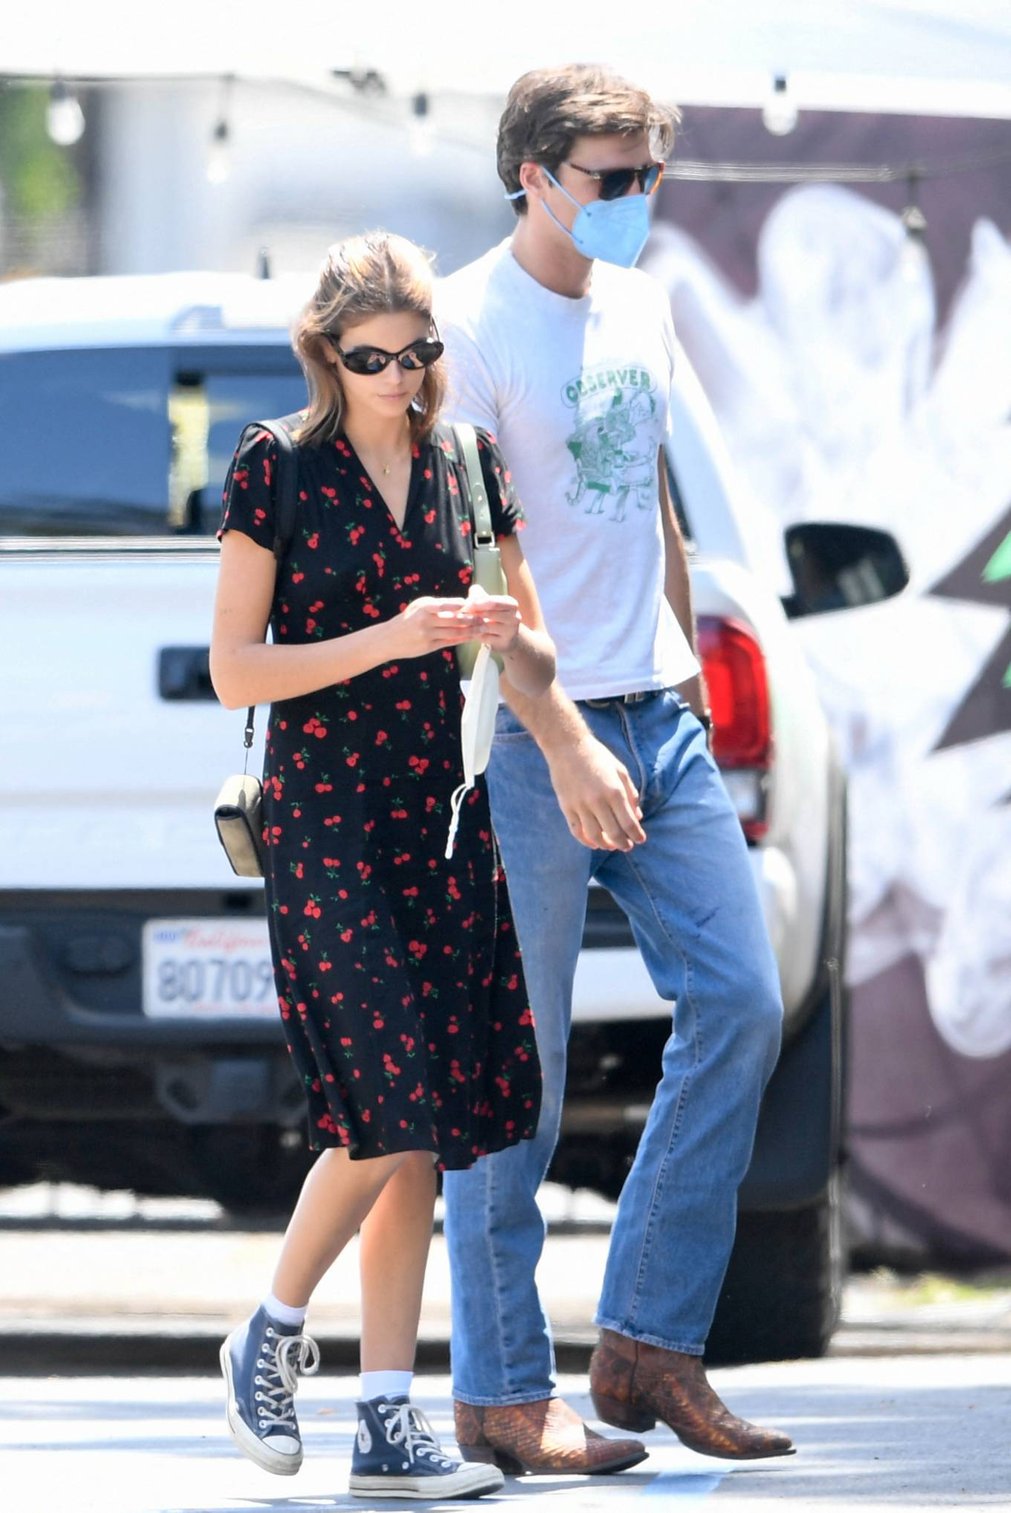 Kaia Gerber - Out in a cherry print dress in West Hollywood